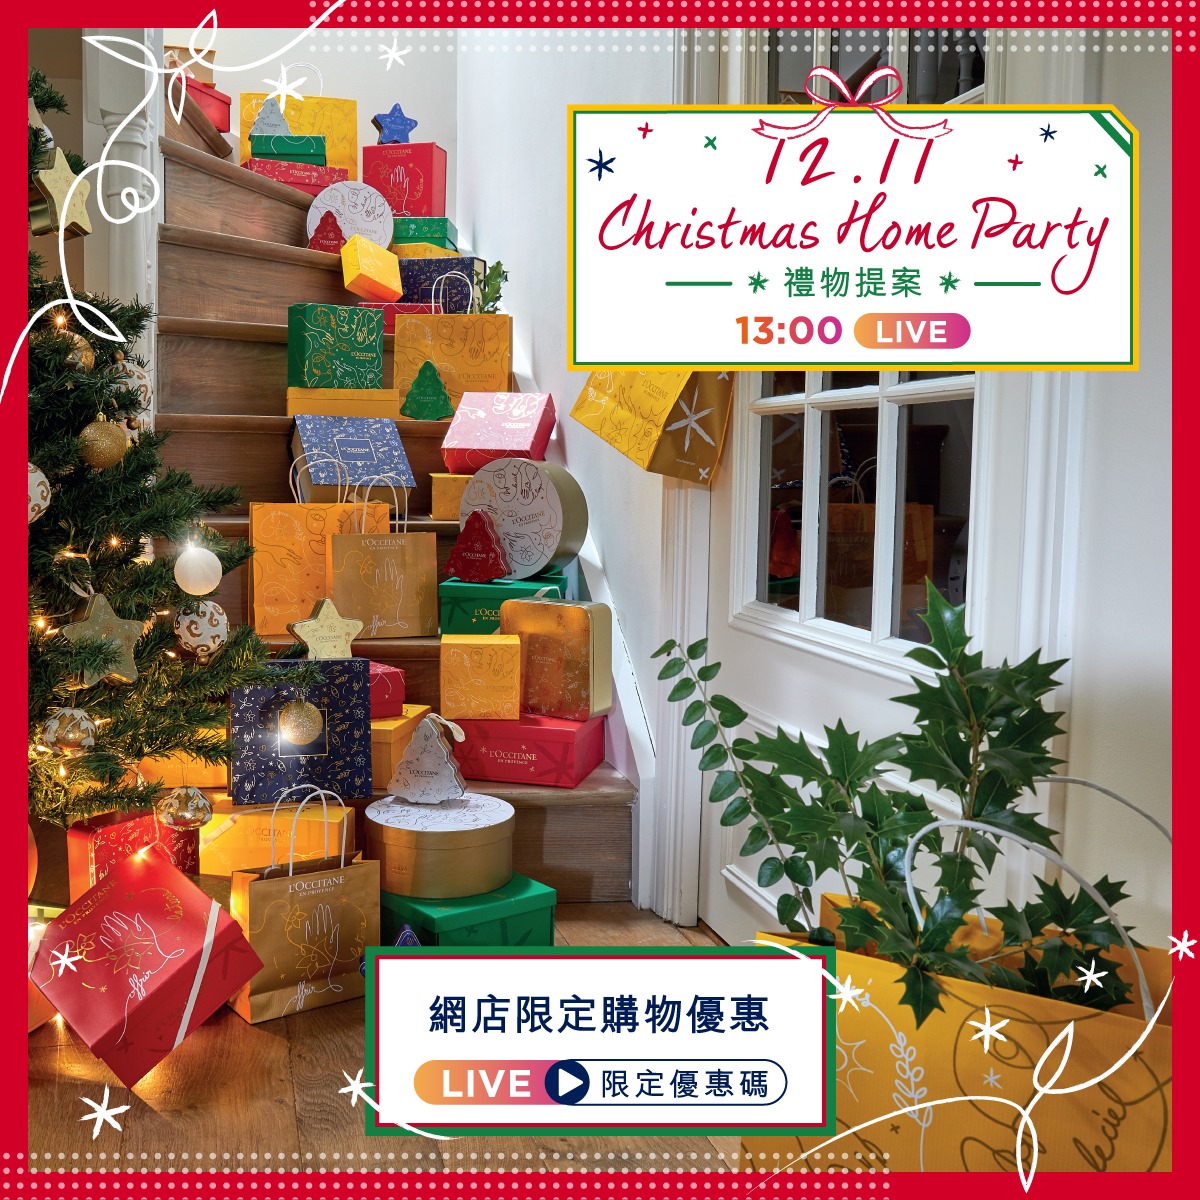 【#LIVE 預告📣  聖誕Home Party禮物提案🎁】